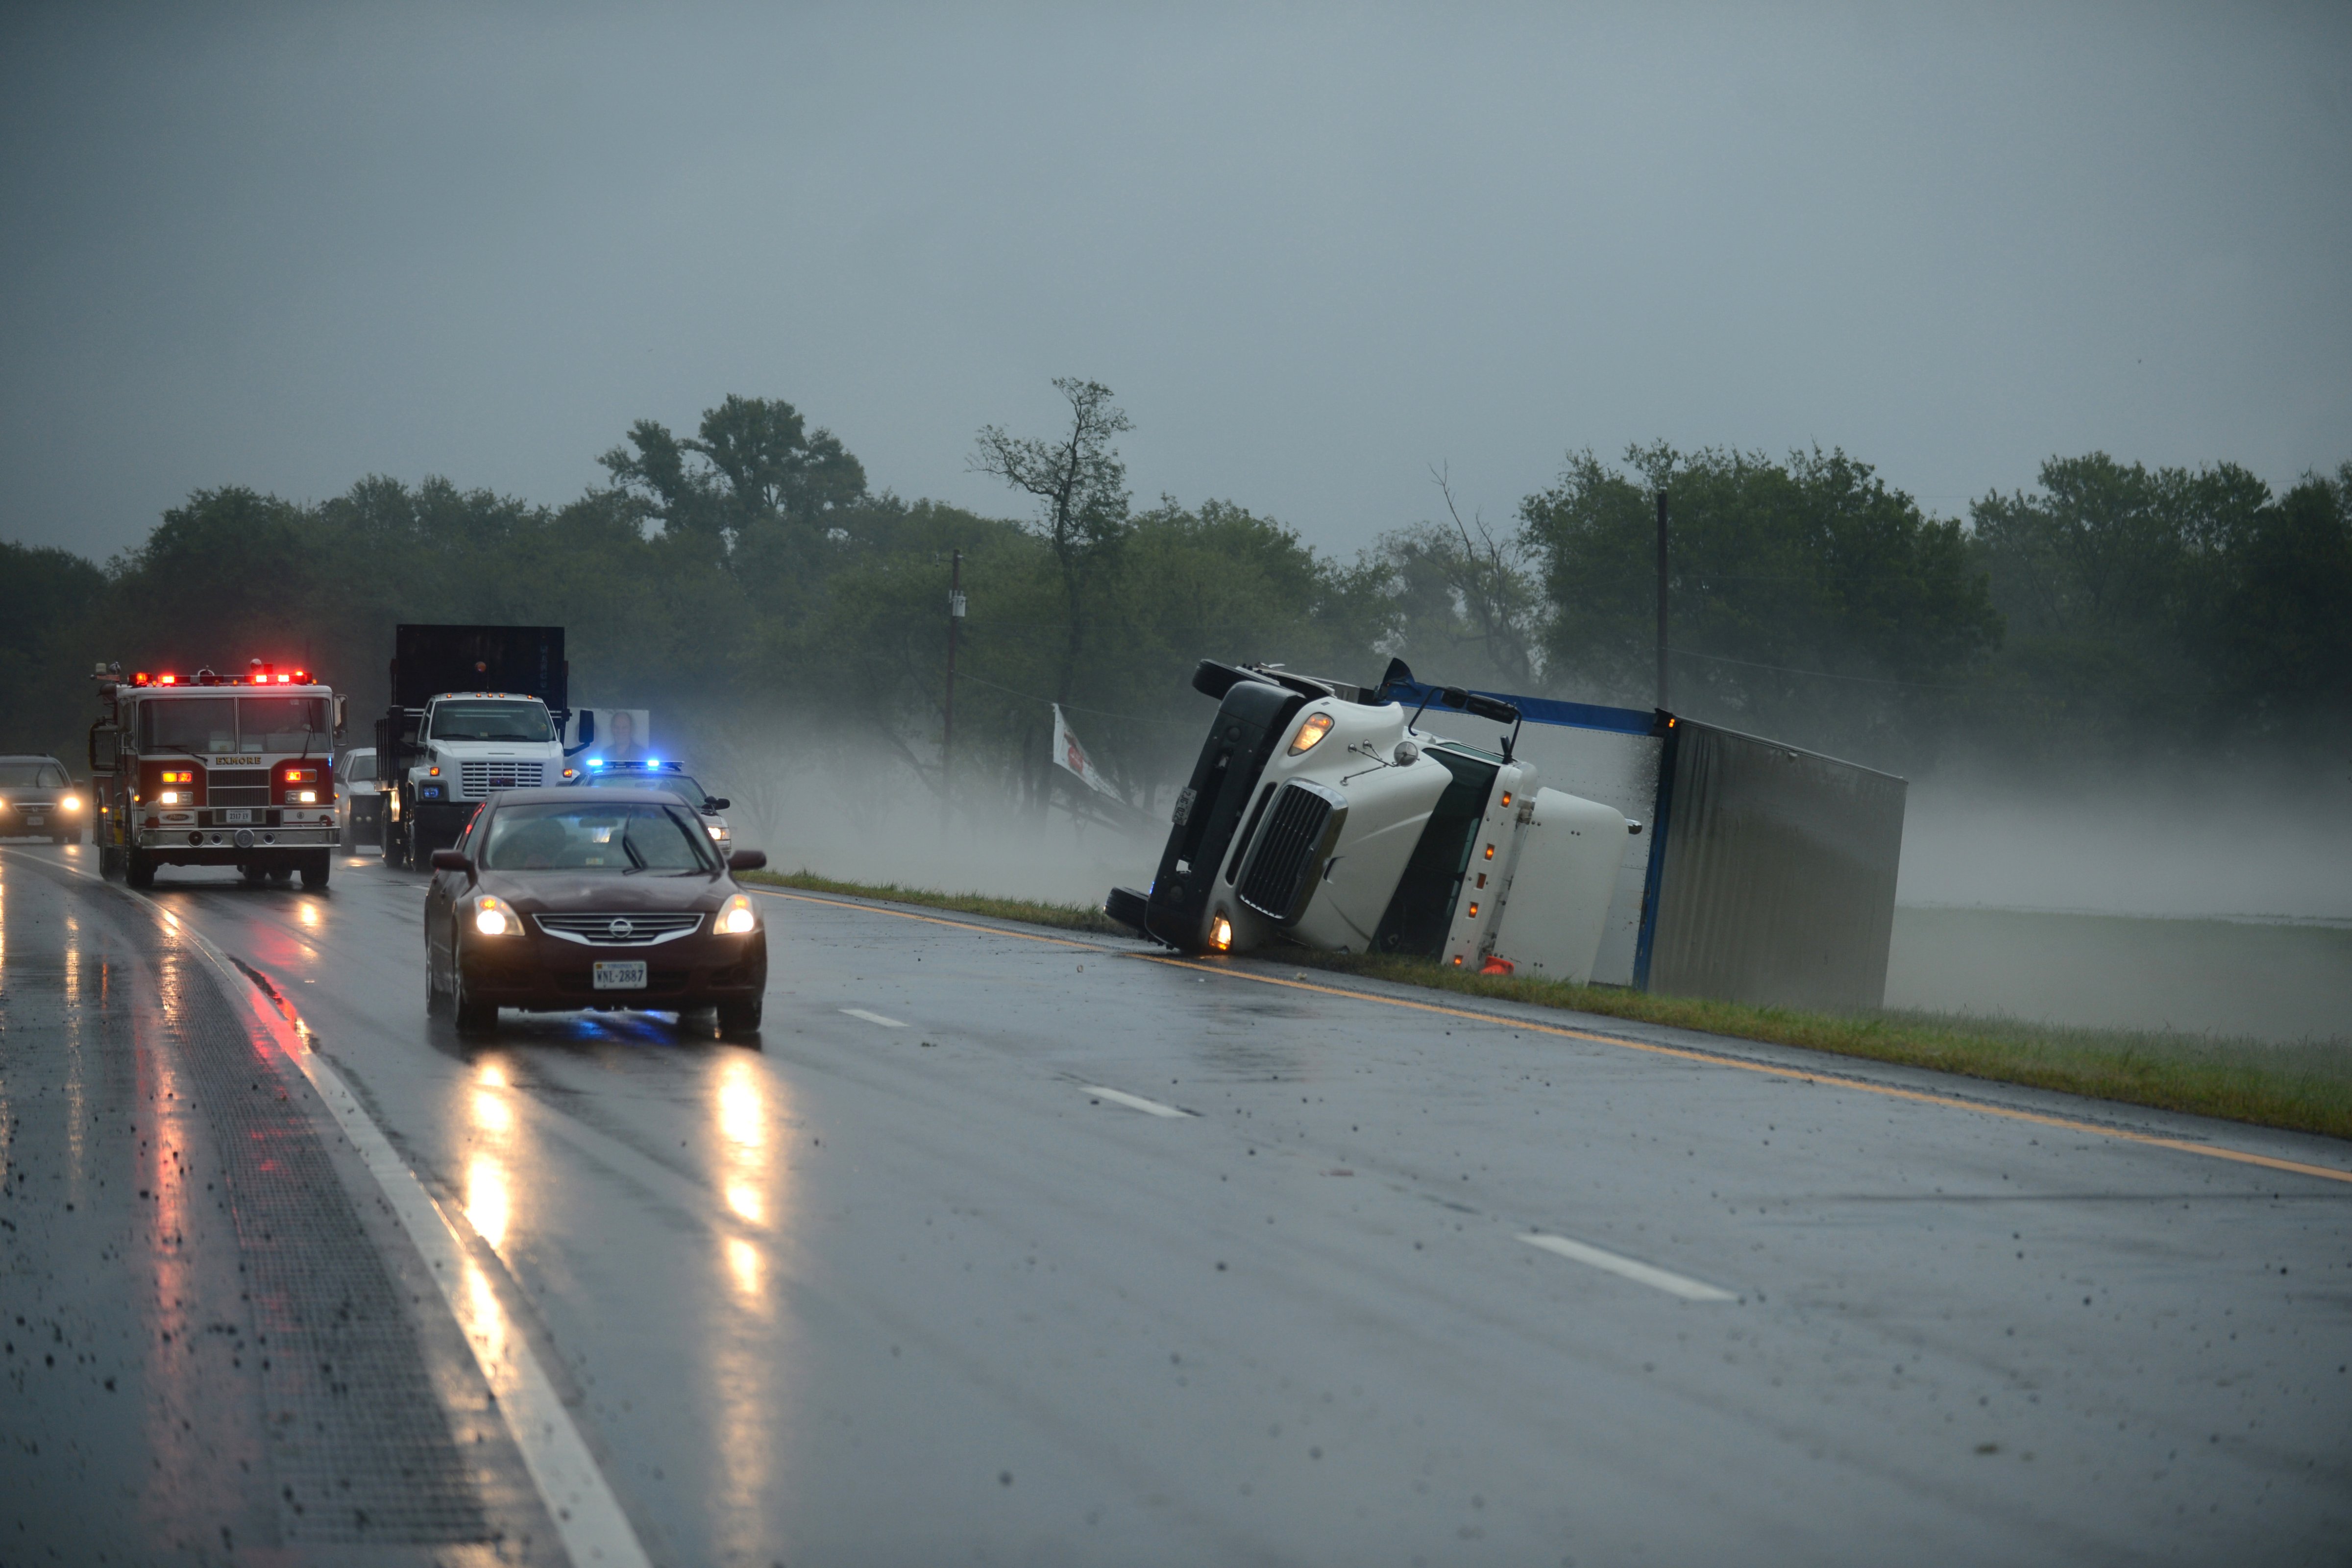 A tractor trailer truck lies on its side in the median of U.S. Route 13 while a fire engine responds to a nearby campground after a severe storm passed through the area, Cheriton, Va, July 24, 2014. (Jay Diem—Eastern Shore News/AP)